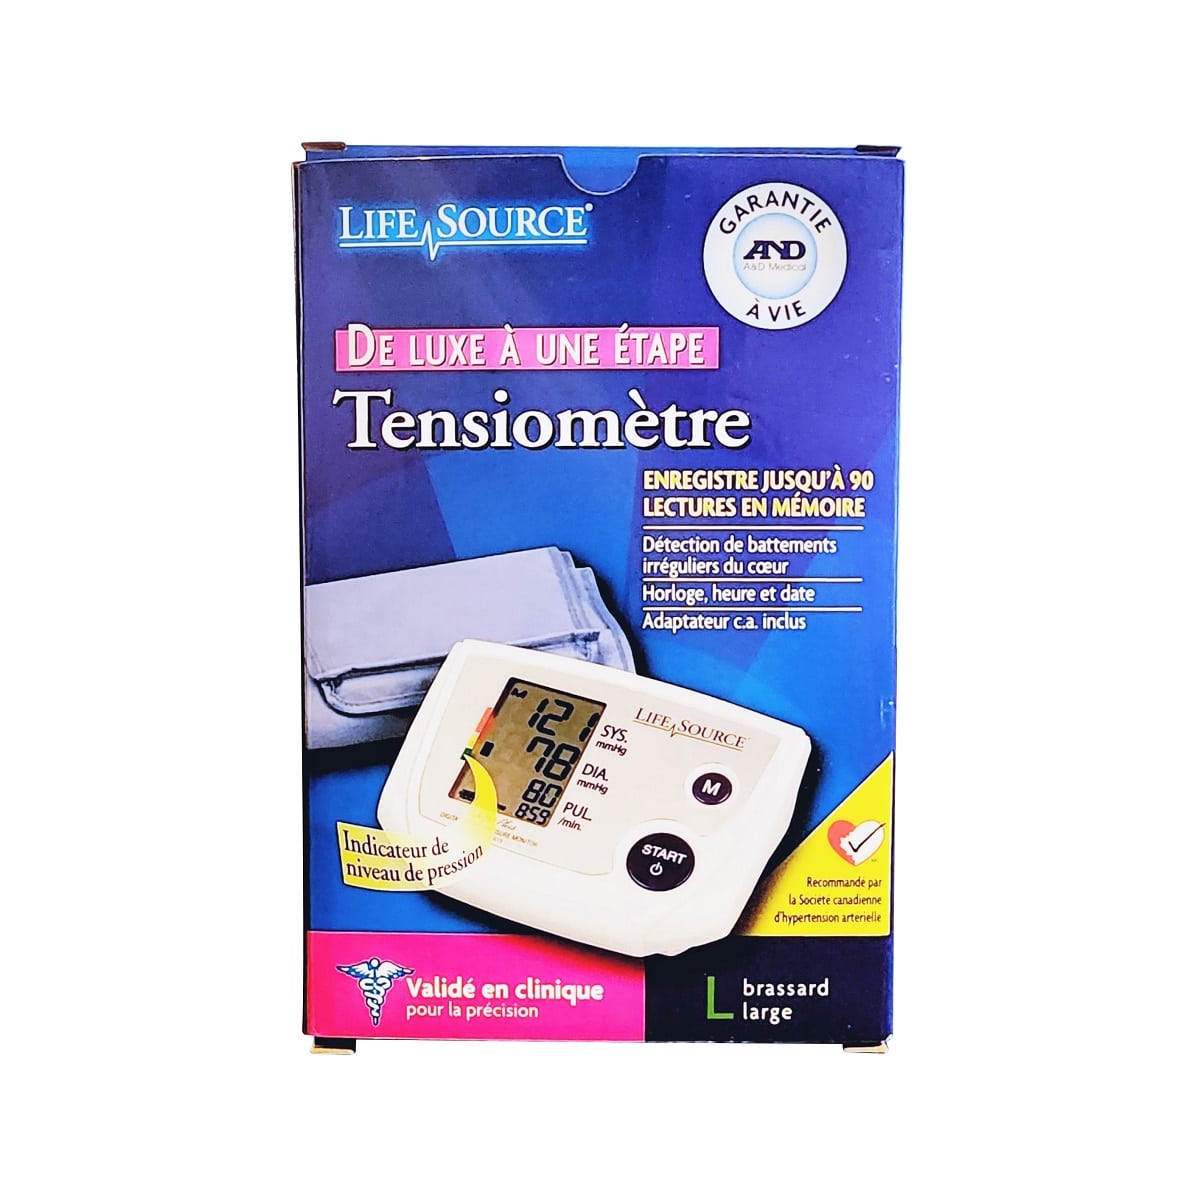 Product label for Life Source Deluxe One Step Blood Pressure Monitor (Large Cuff) in French